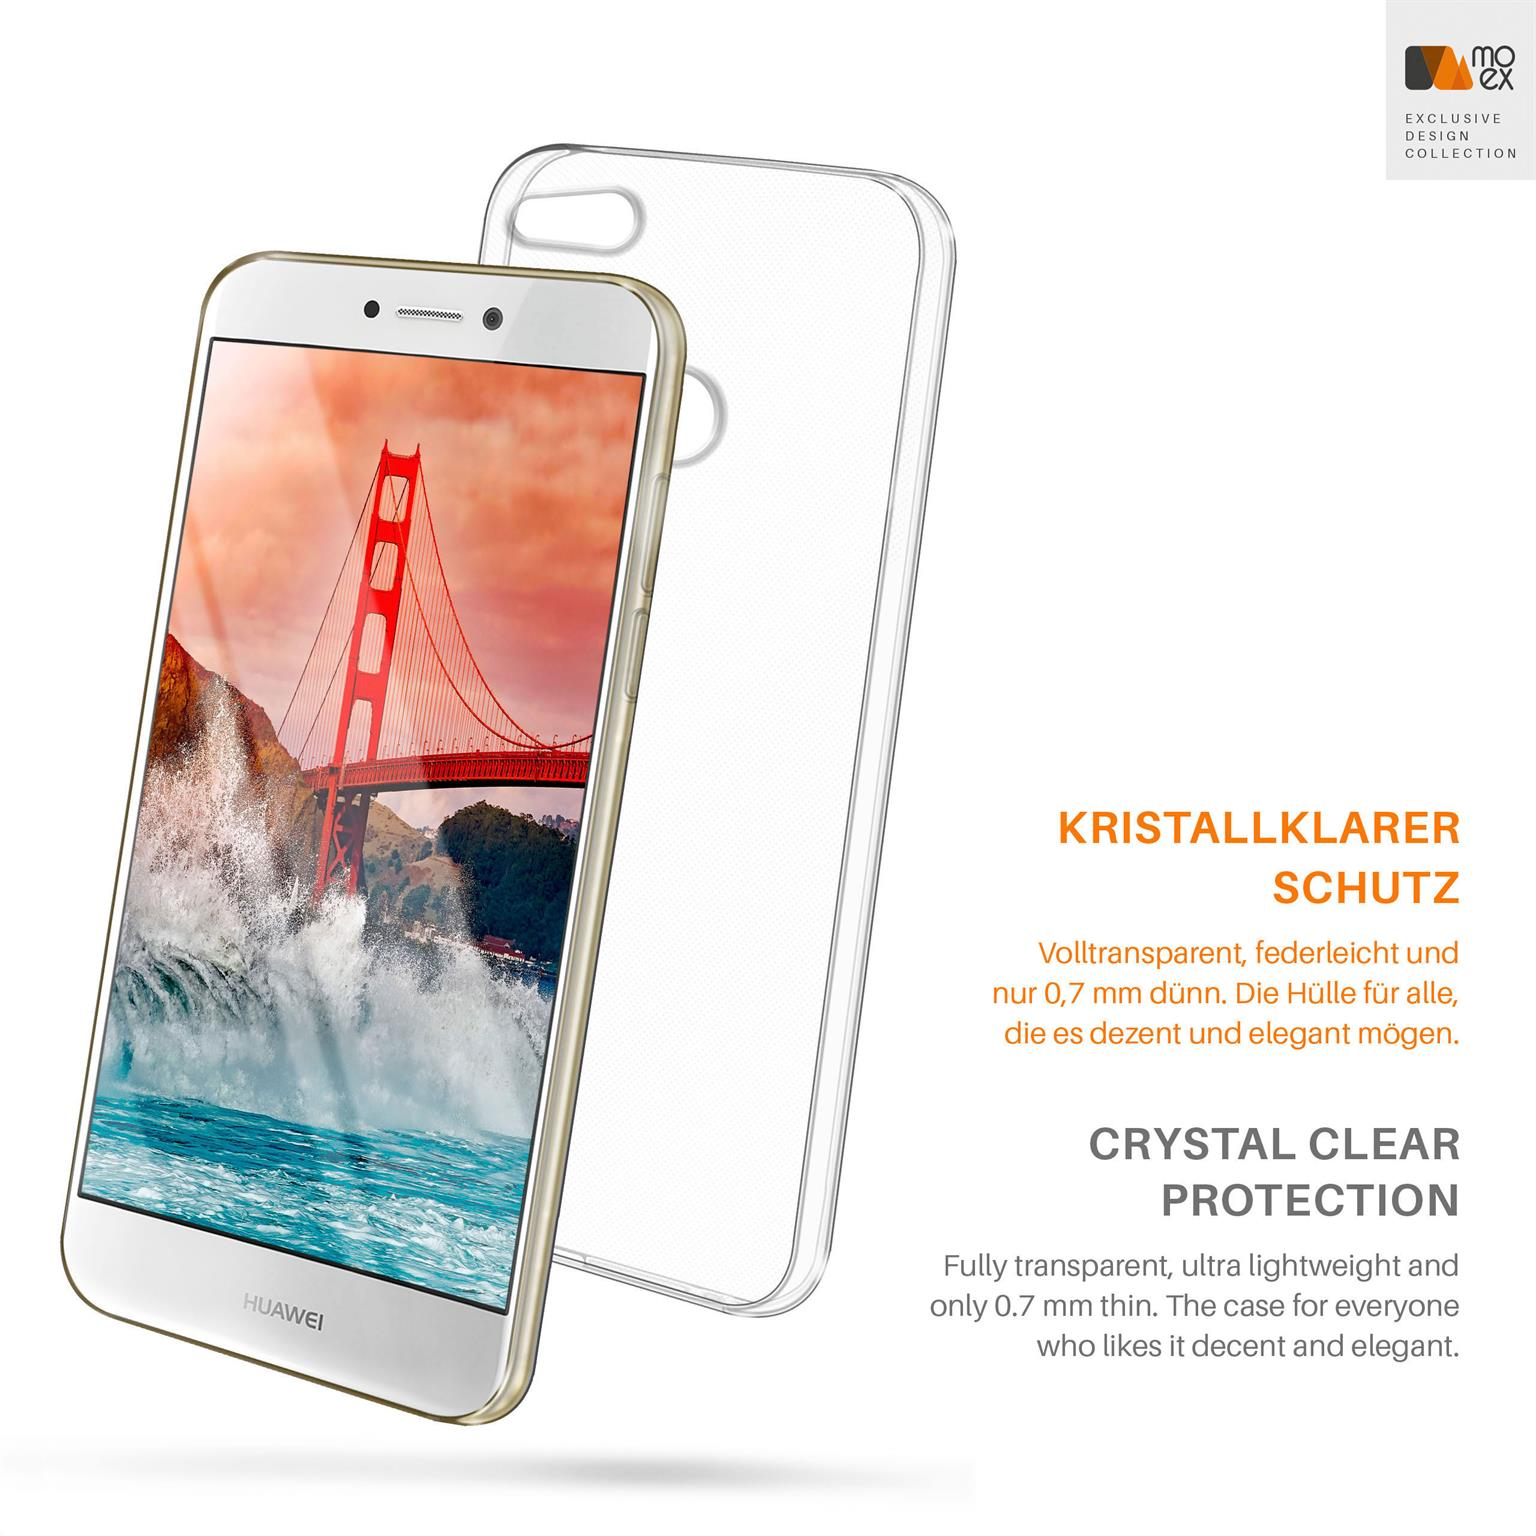 Huawei, Case, Crystal-Clear Aero Backcover, P8 Lite MOEX 2017,